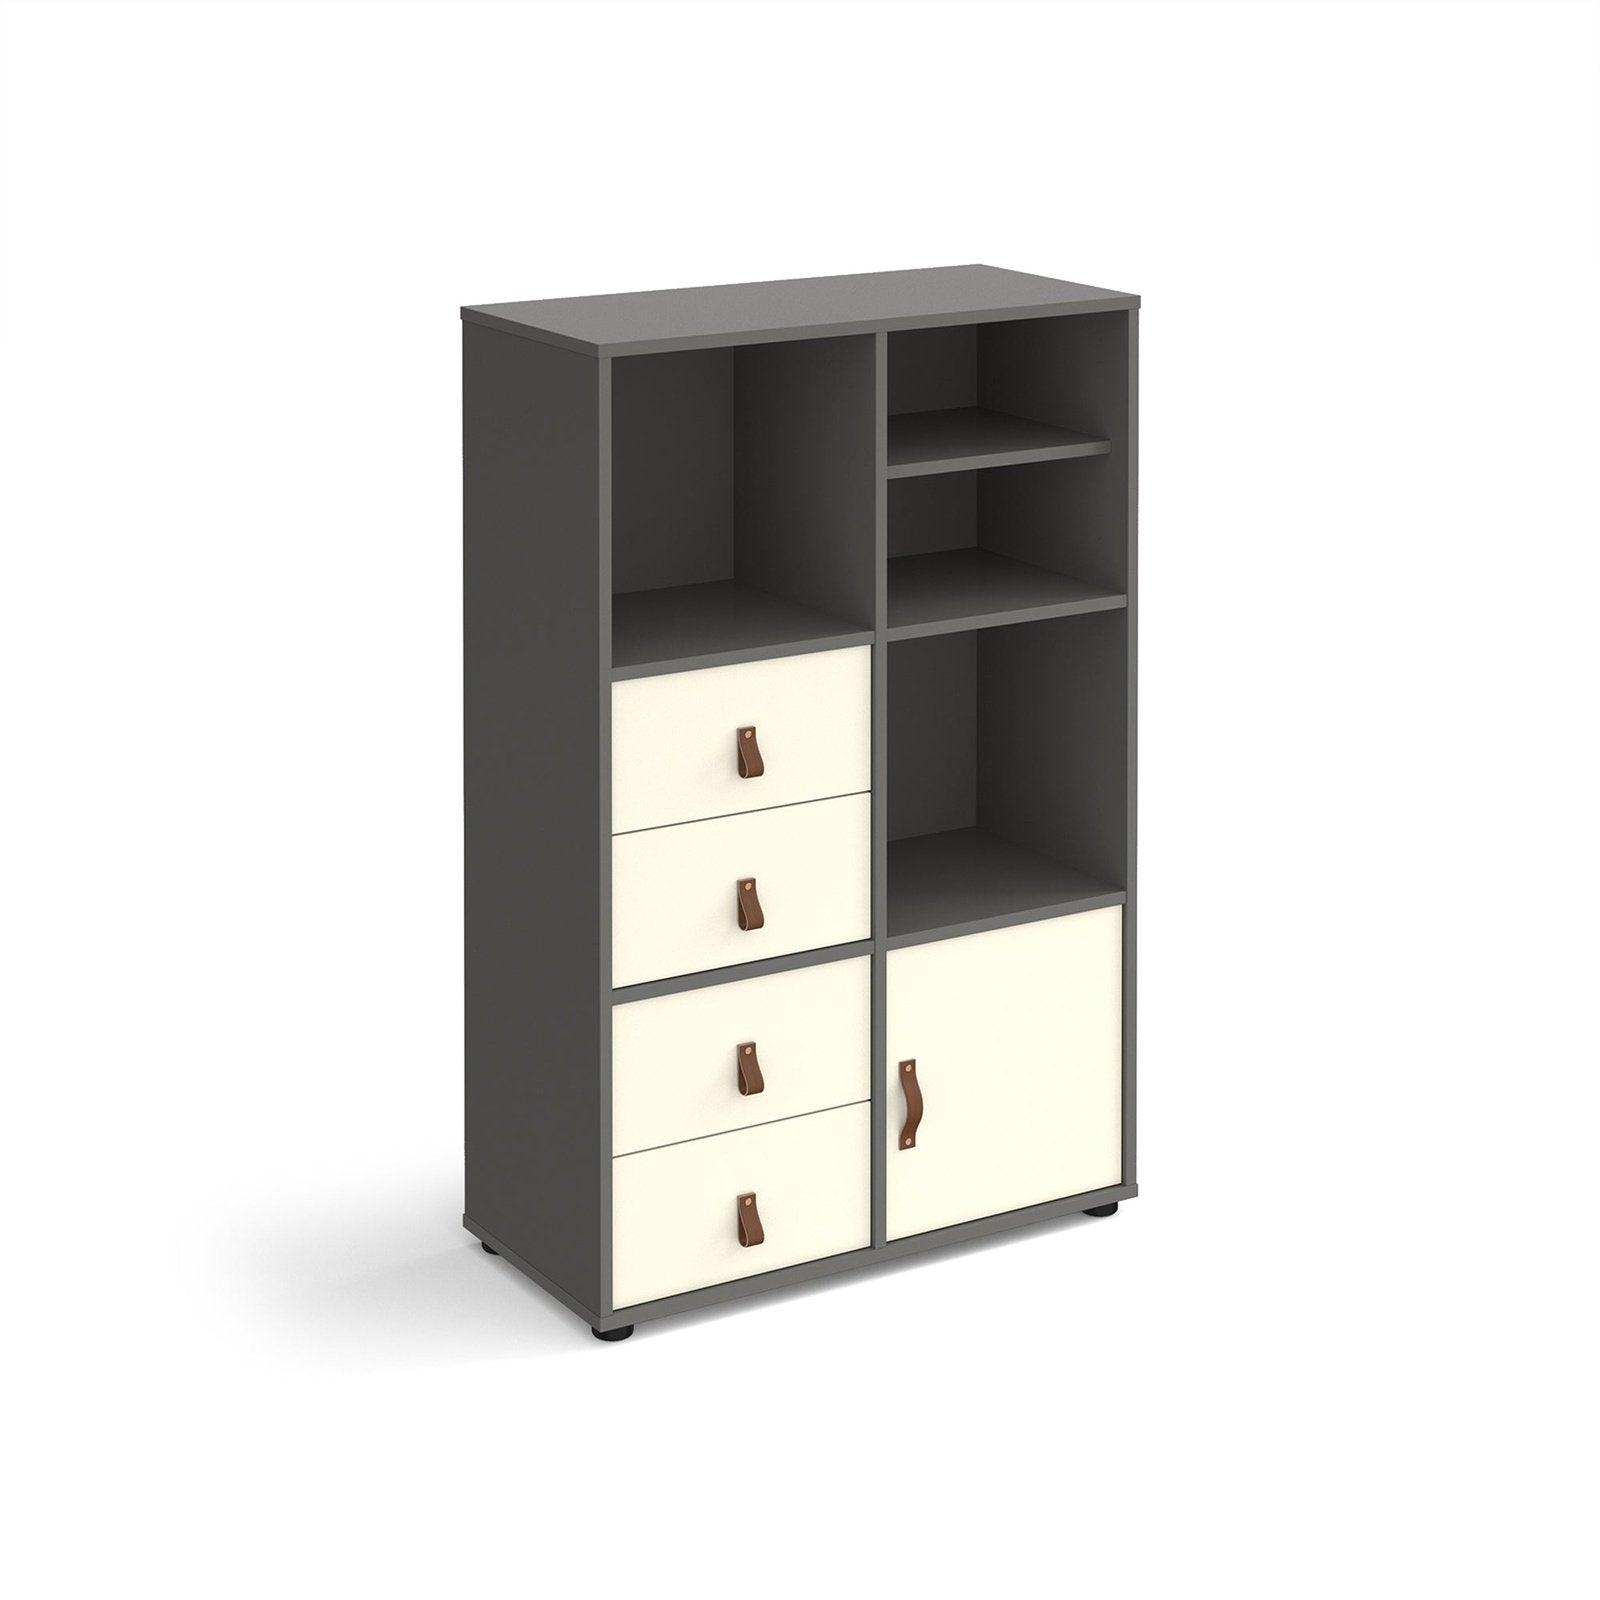 Universal cube storage unit 1295mm high on glides with matching shelf, cupboard and 2 sets of drawers - Office Products Online